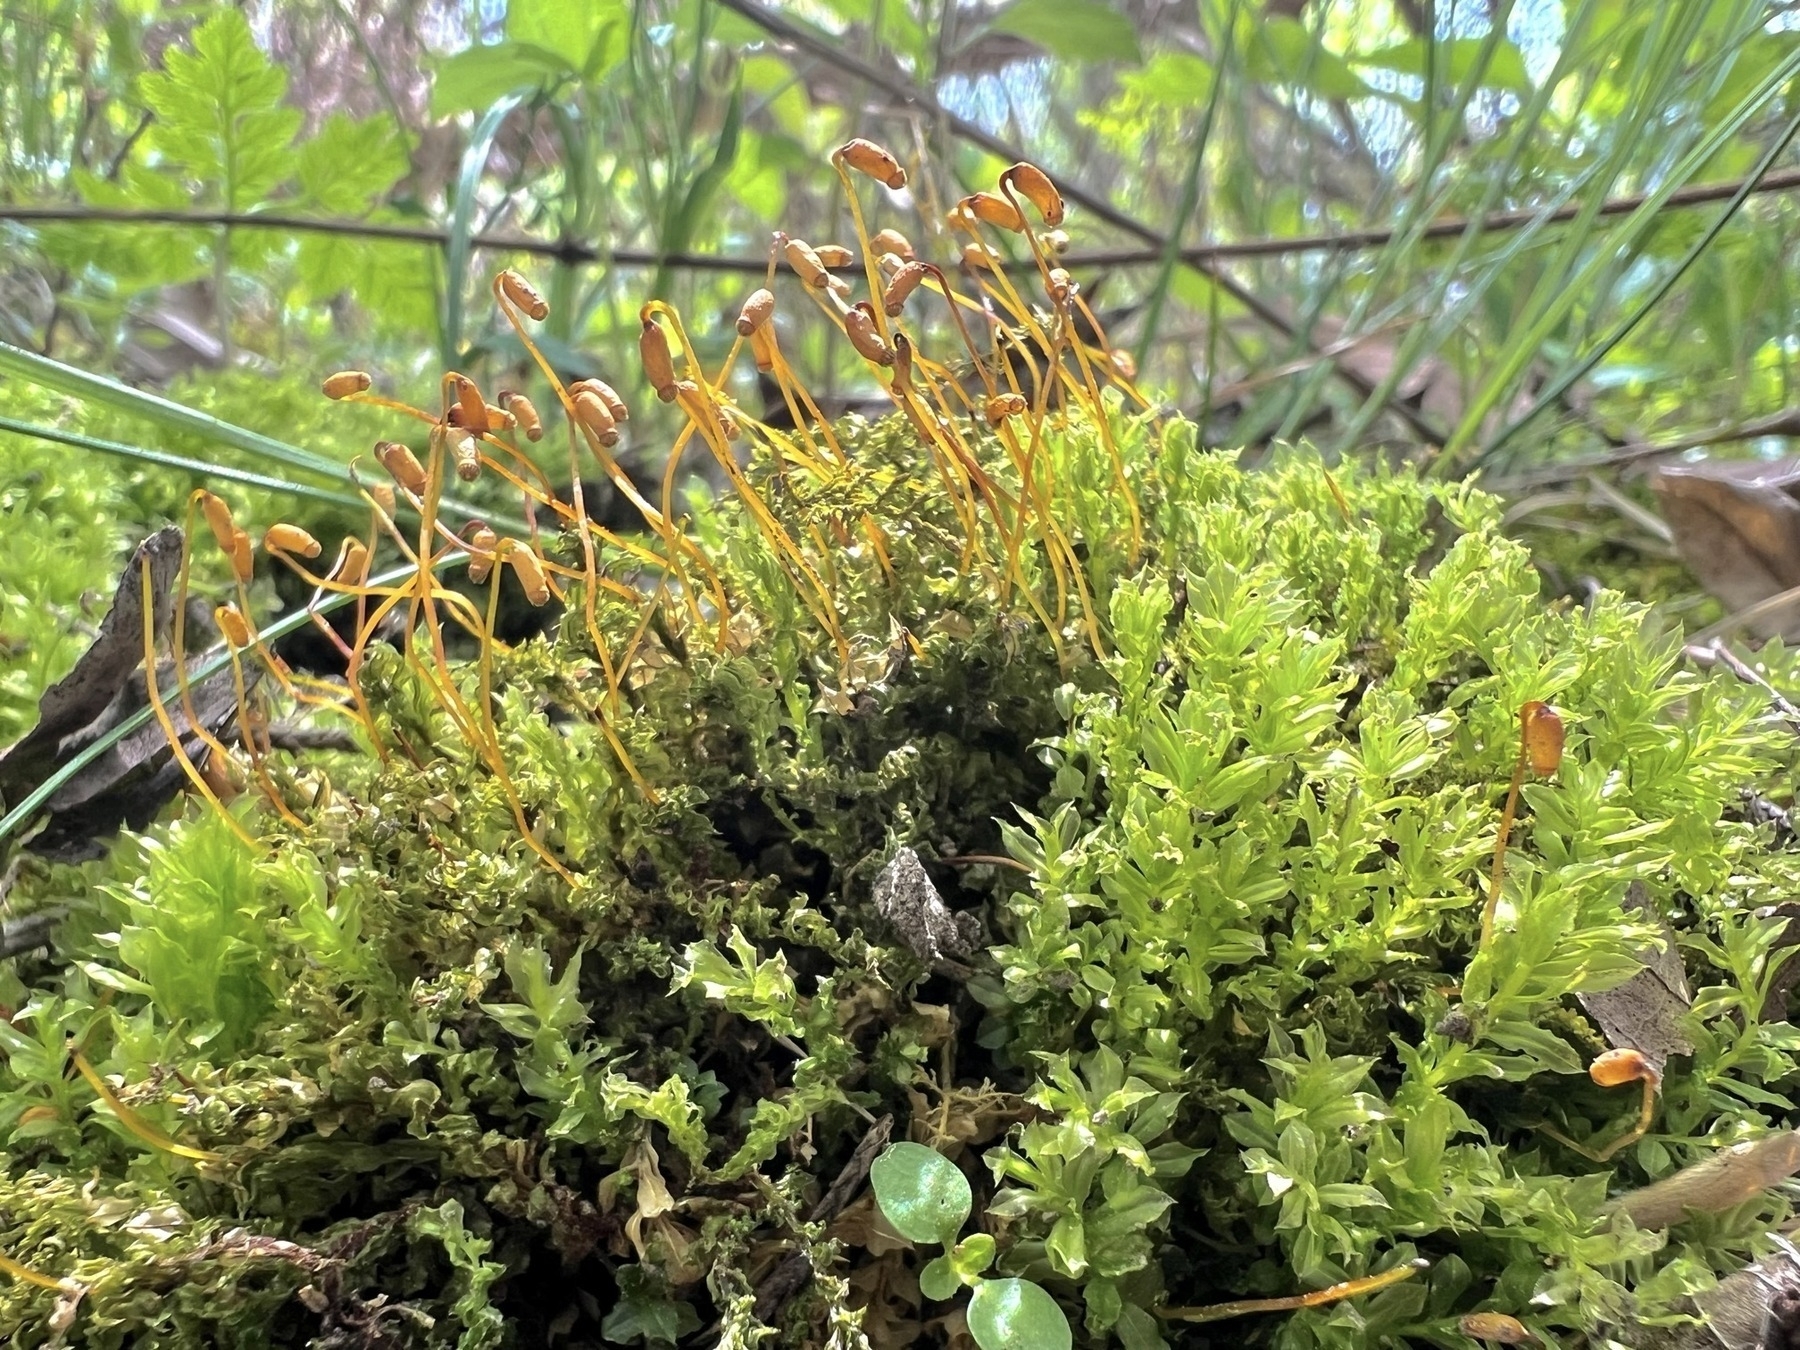 A mound of various species of vibrant green mosses. Thirty to forty orange sporophytes grow from the center. These are thin tendrils with hollow, oval shaped ends that disperse seeds.